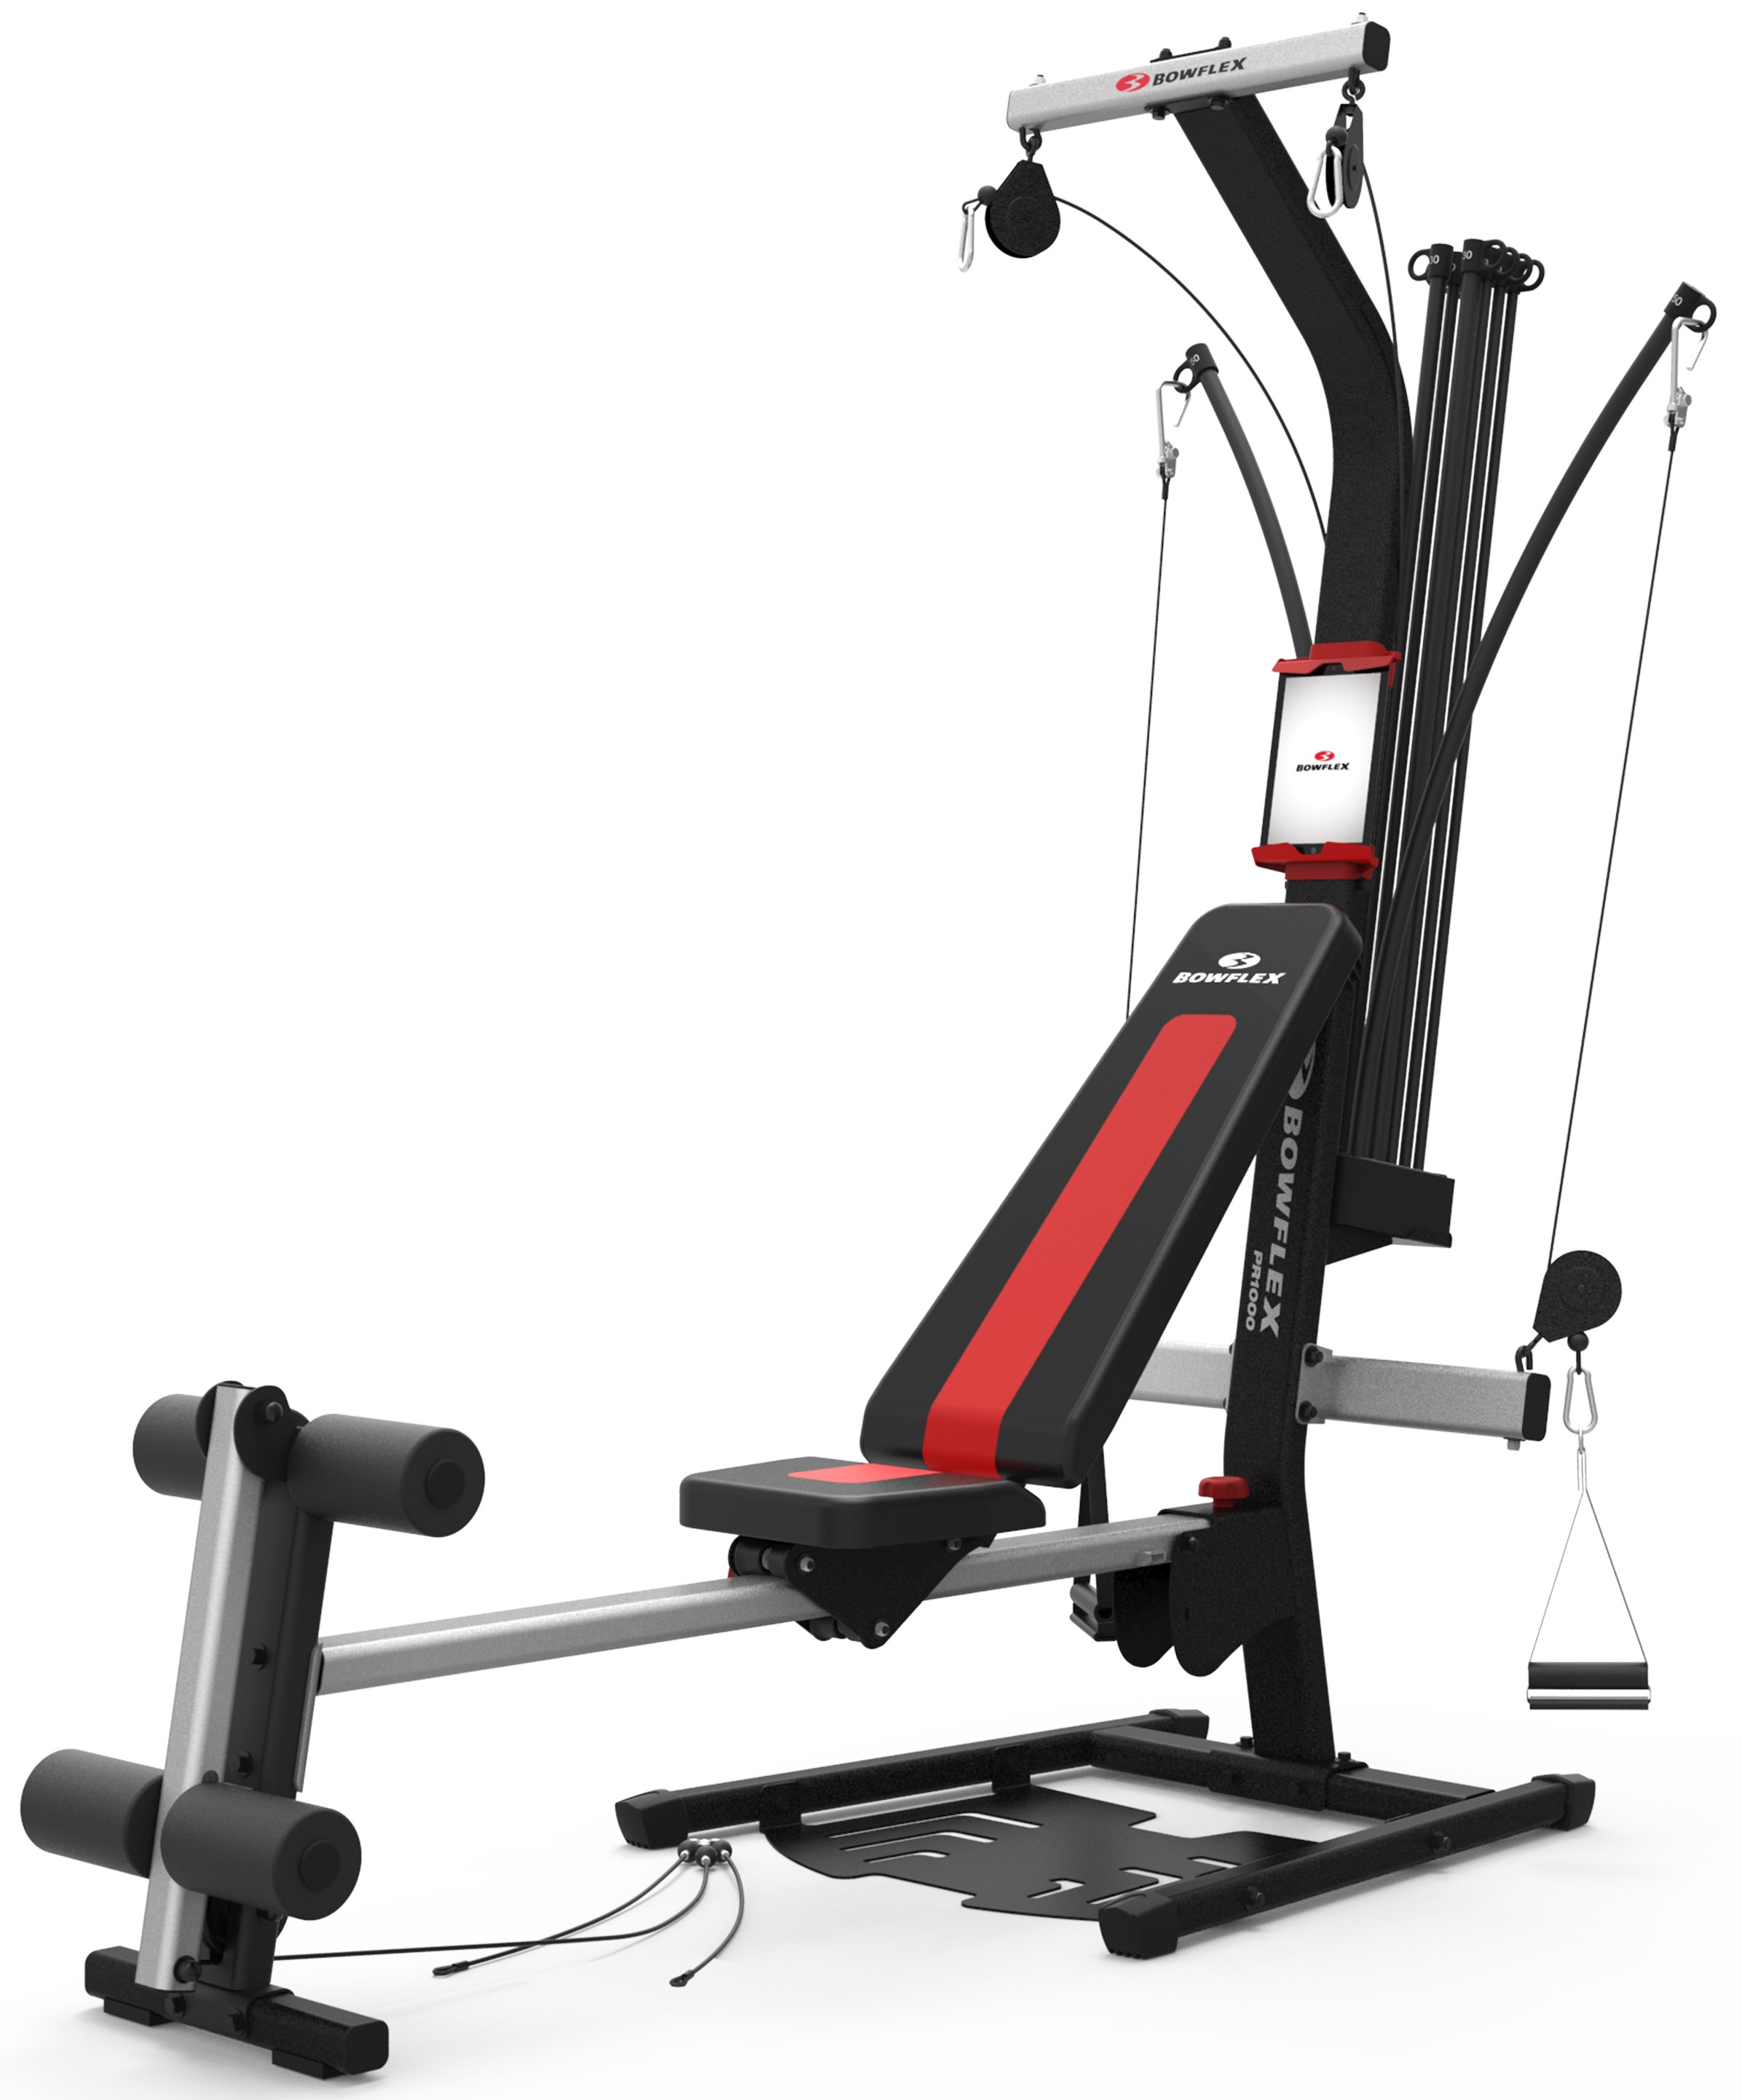 Bowflex PR1000 Home Gym Weight Lifting Aerobic Rowing and Vertical Folding Bench - image 3 of 10